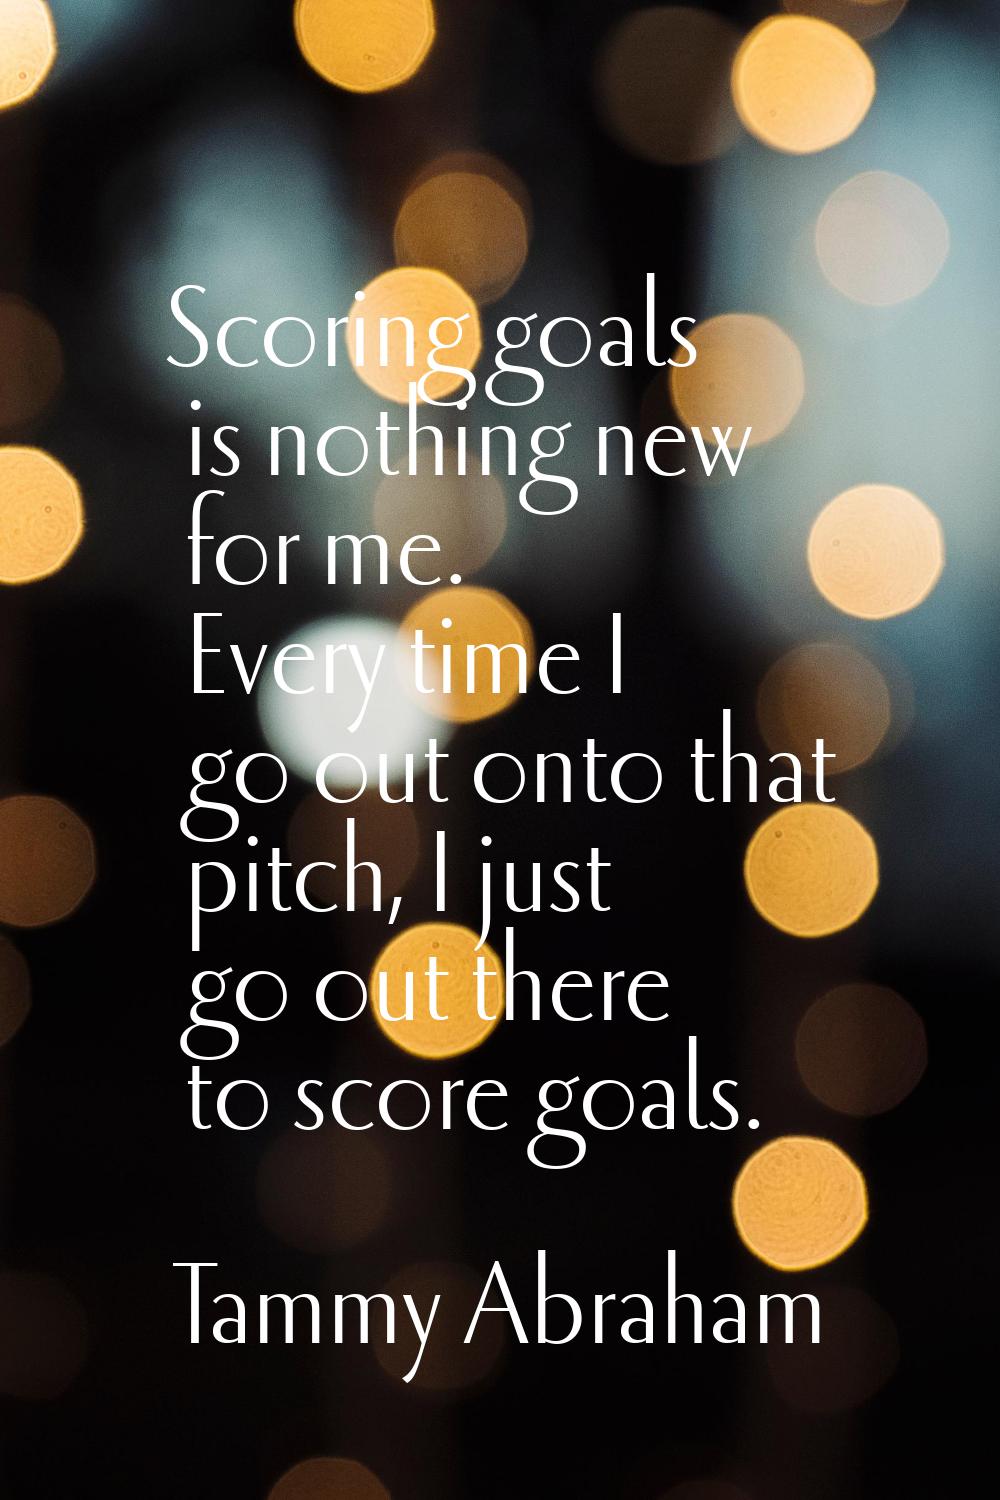 Scoring goals is nothing new for me. Every time I go out onto that pitch, I just go out there to sc